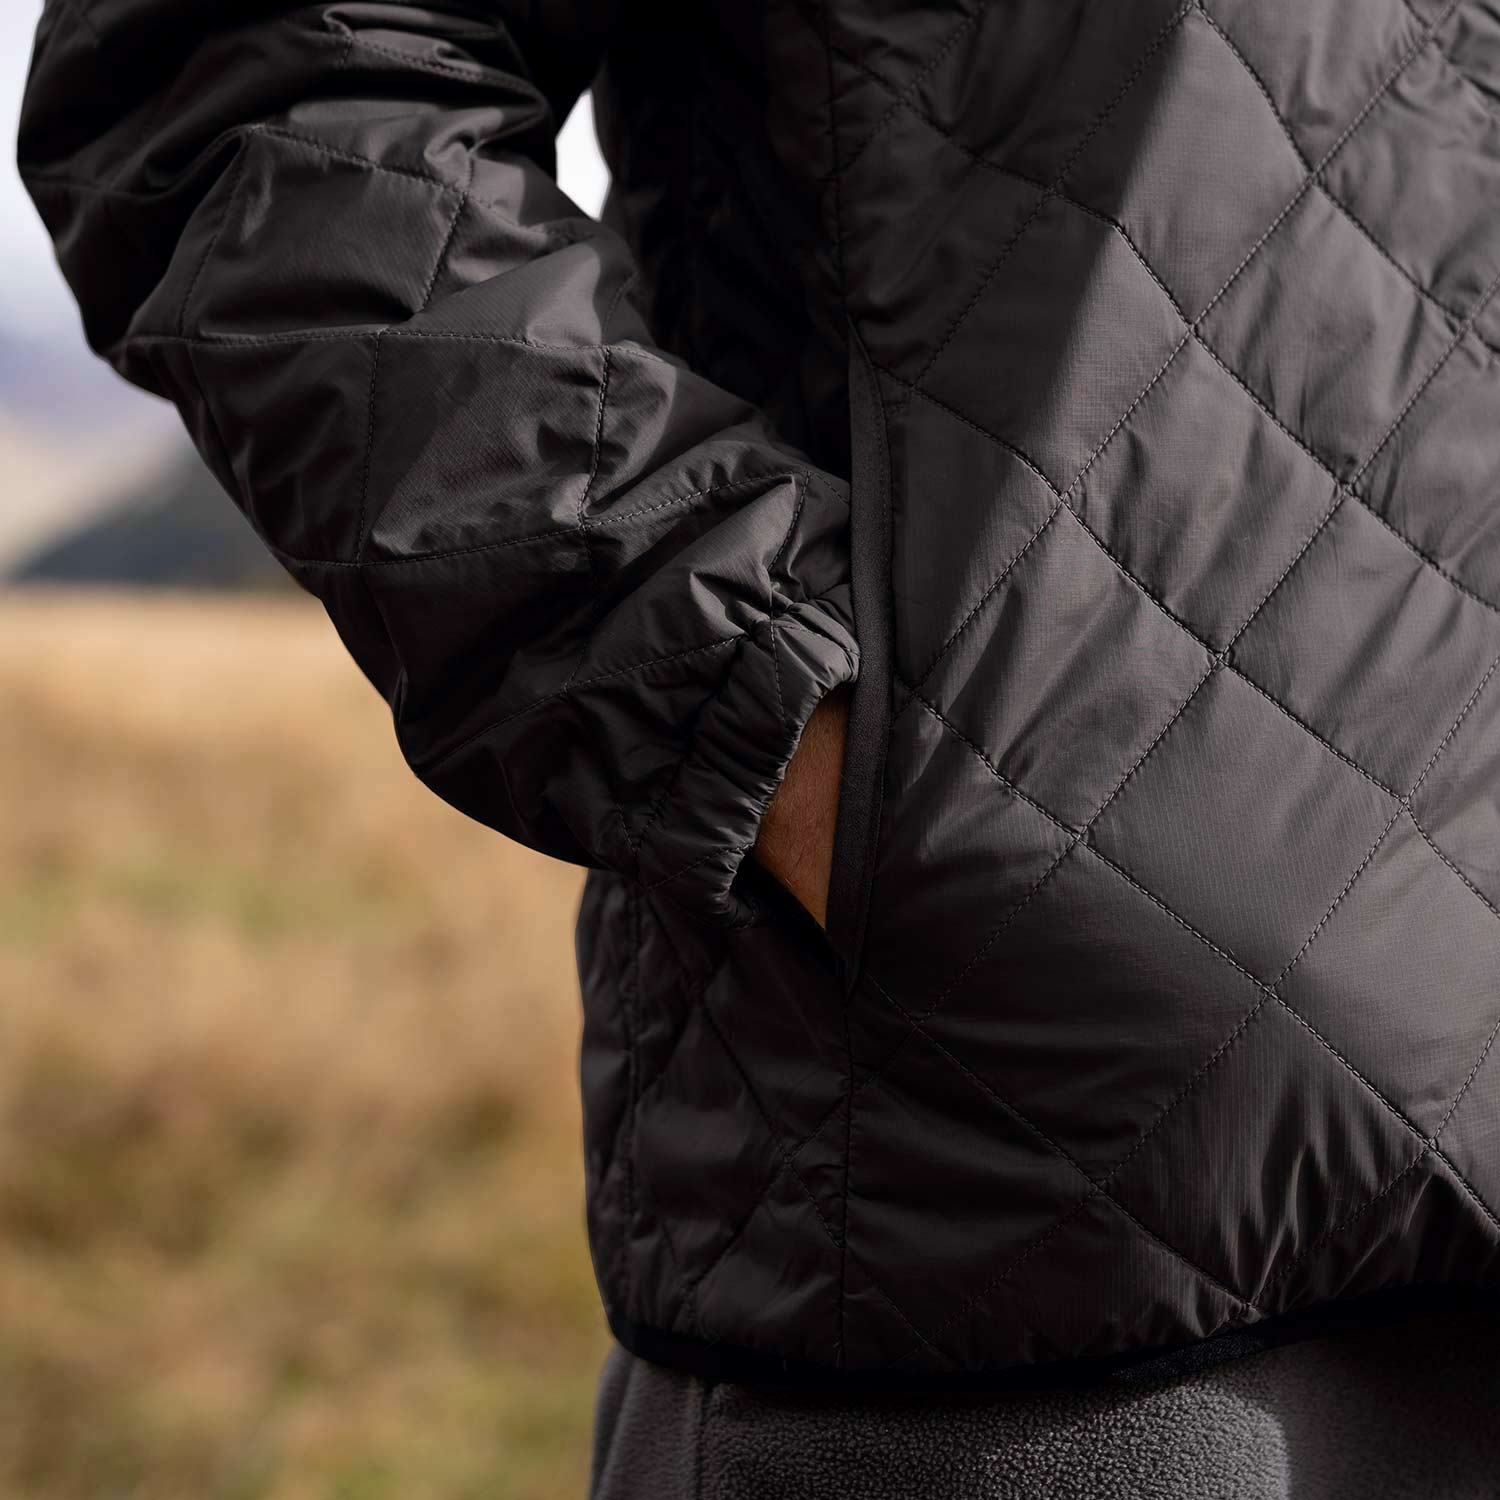 Mens Insulated Jacket Black